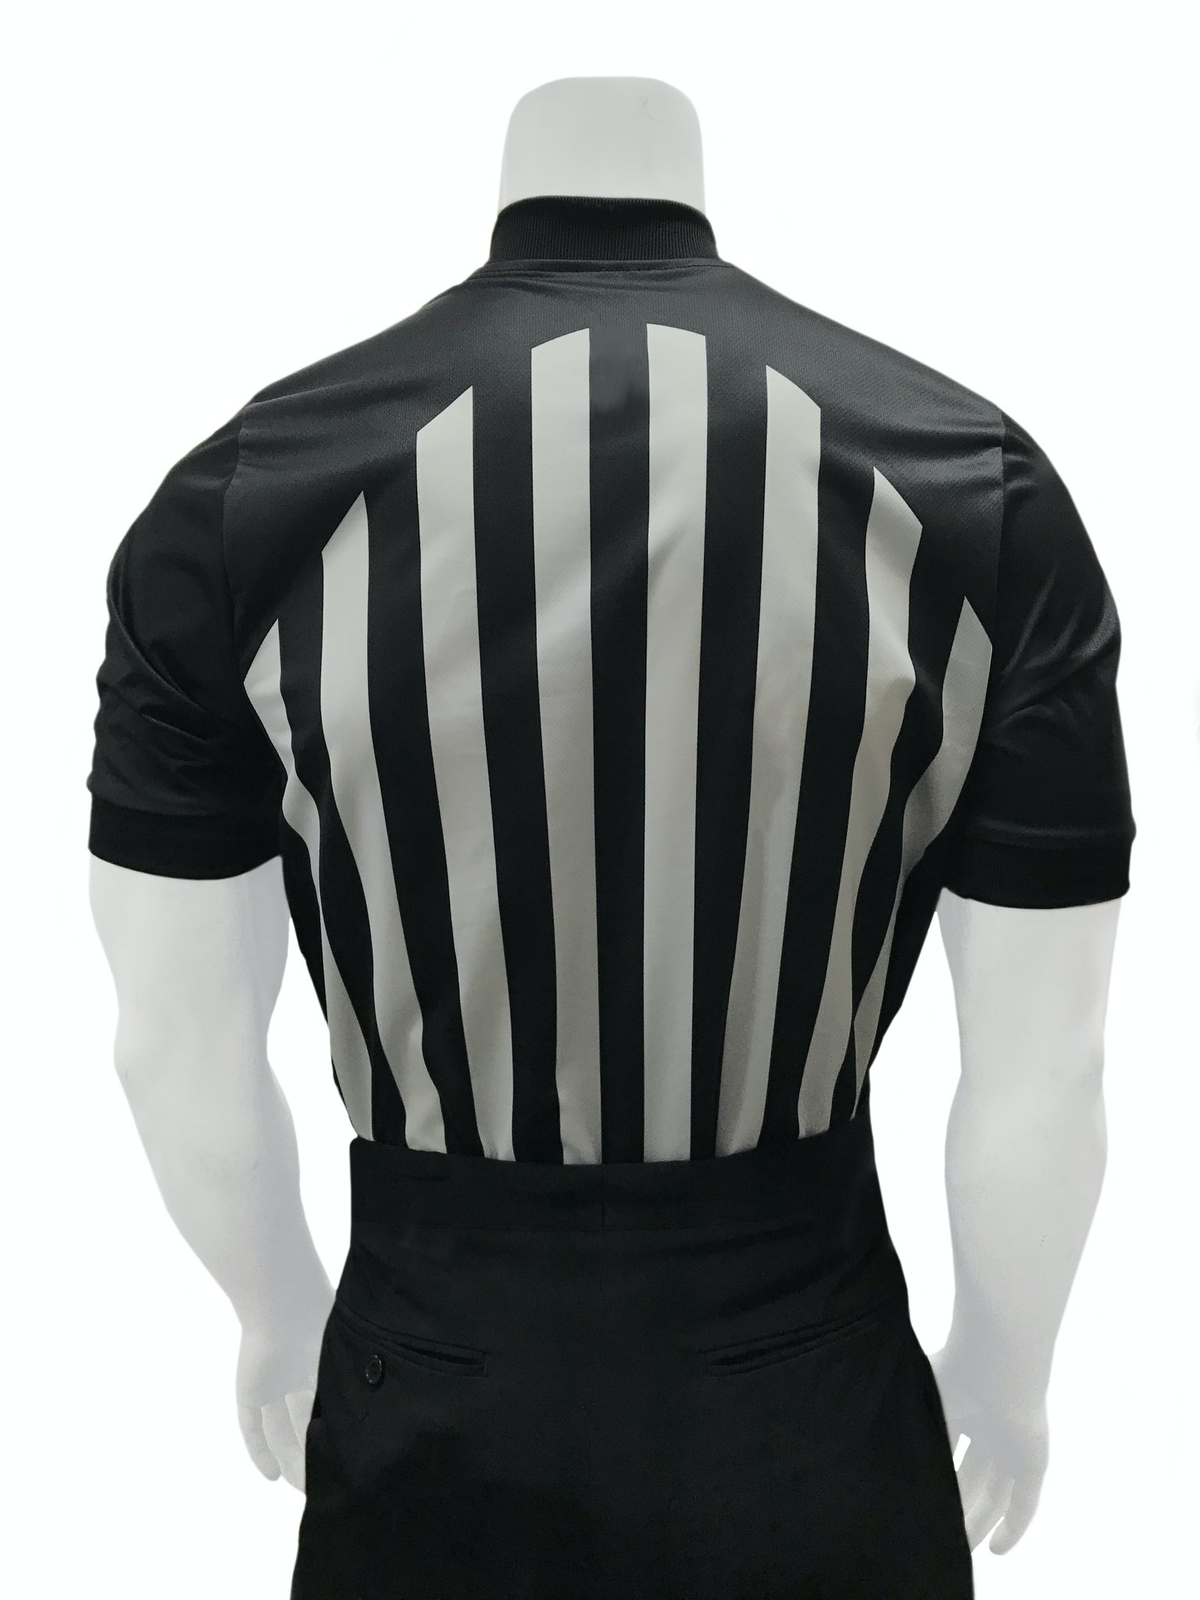 Smitty | USA-216-607 | NCAA Approved "BODY FLEX" Men's Basketball Collegiate Referee Shirt | Made in USA - Great Call Athletics